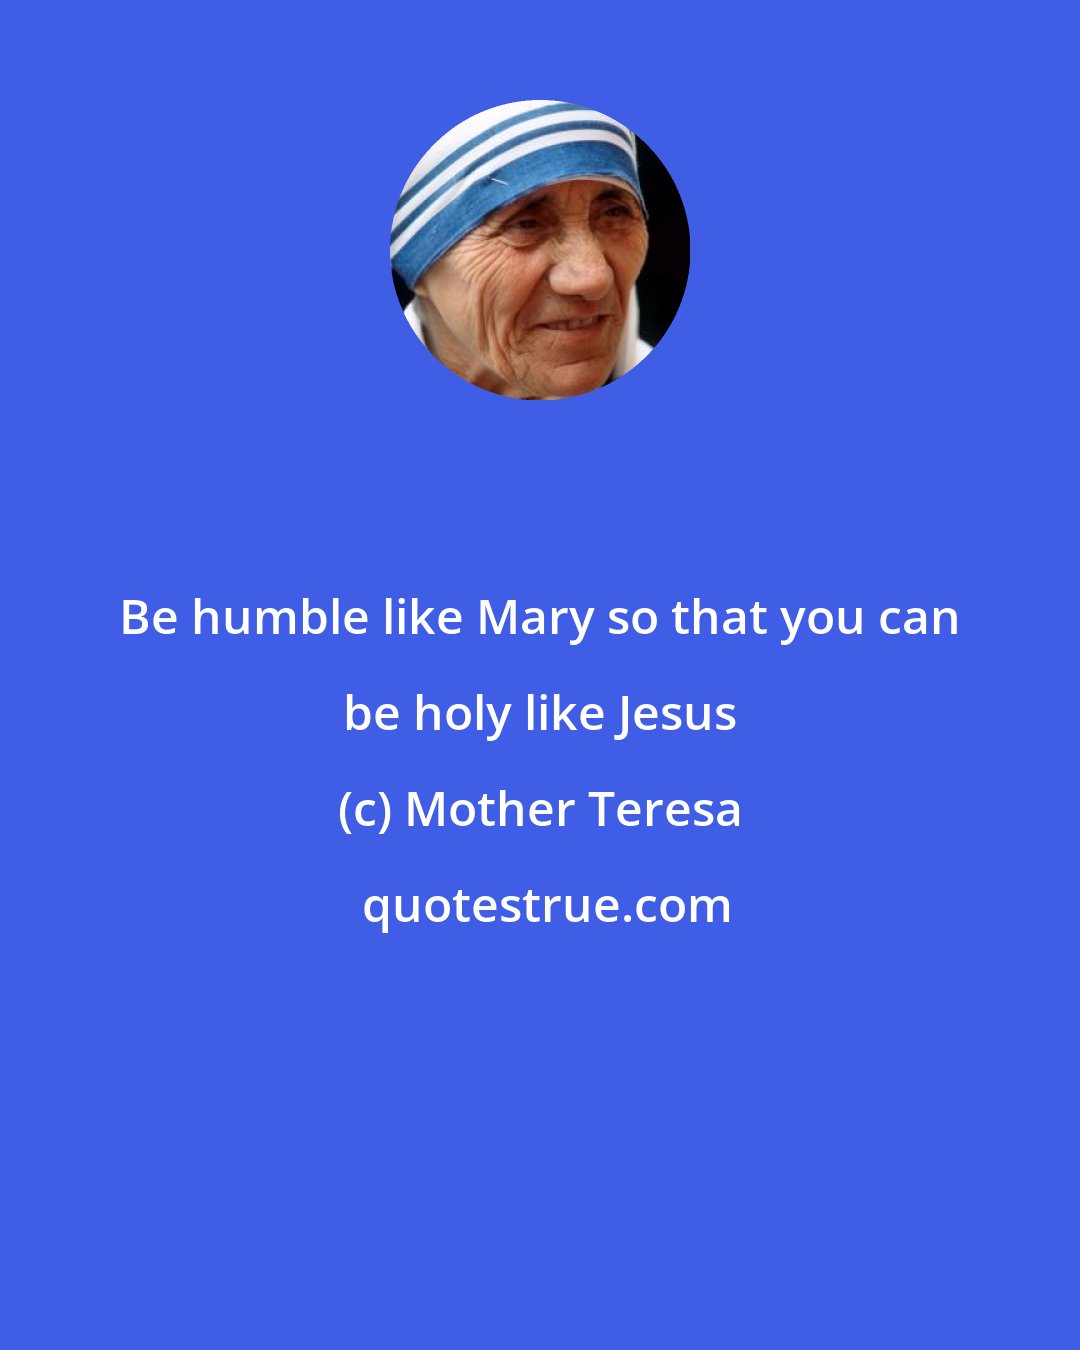 Mother Teresa: Be humble like Mary so that you can be holy like Jesus